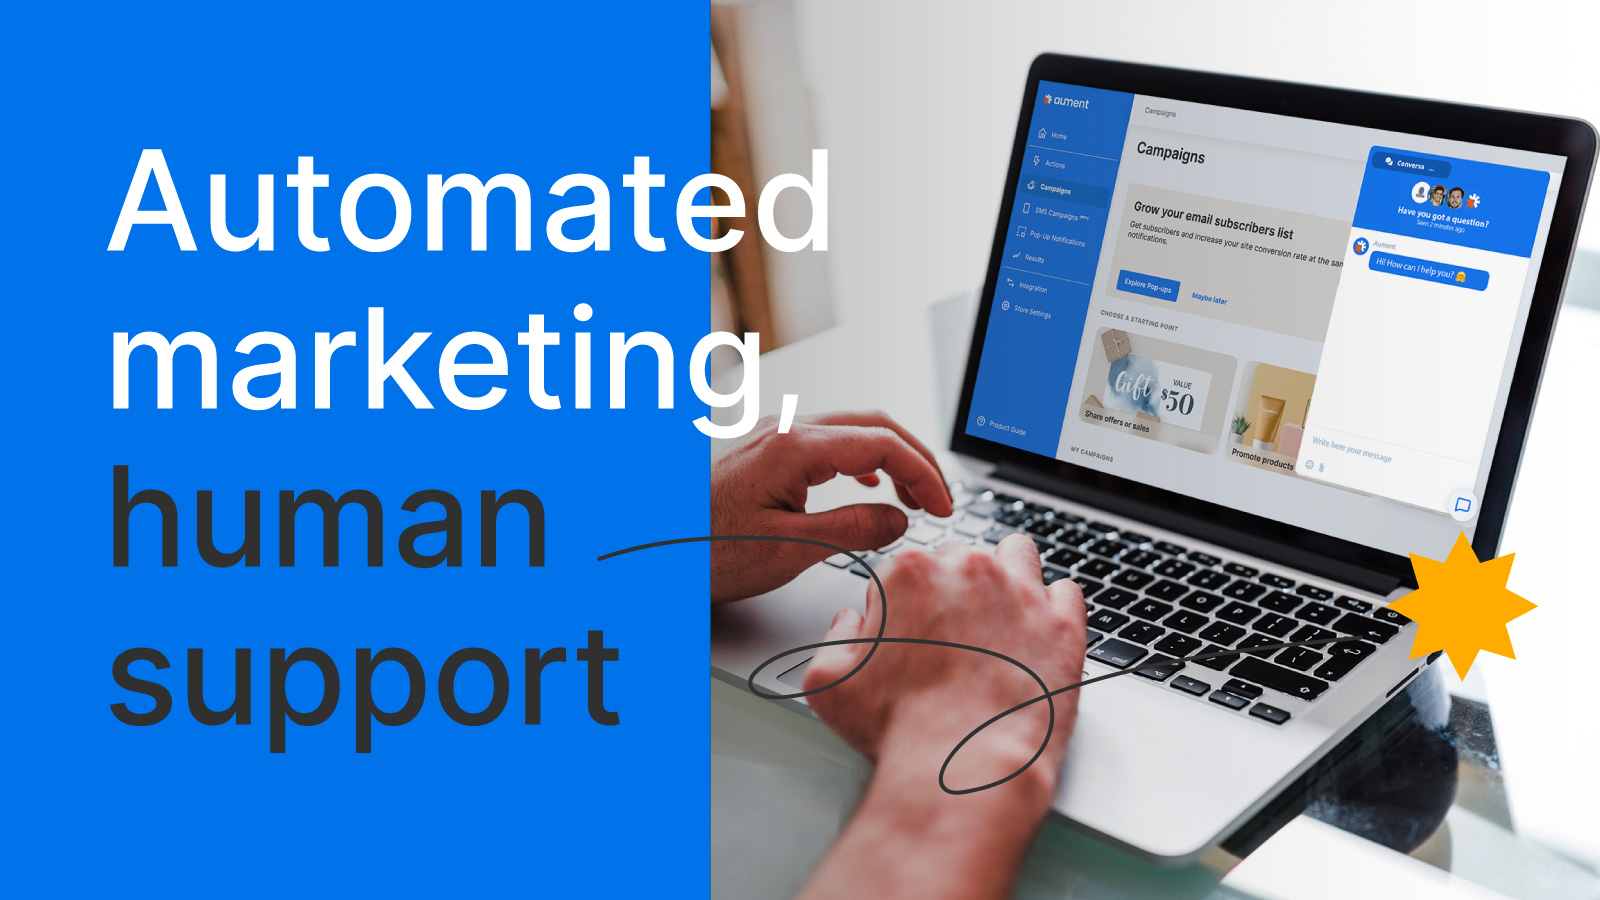 Automate your email marketing and grow your business